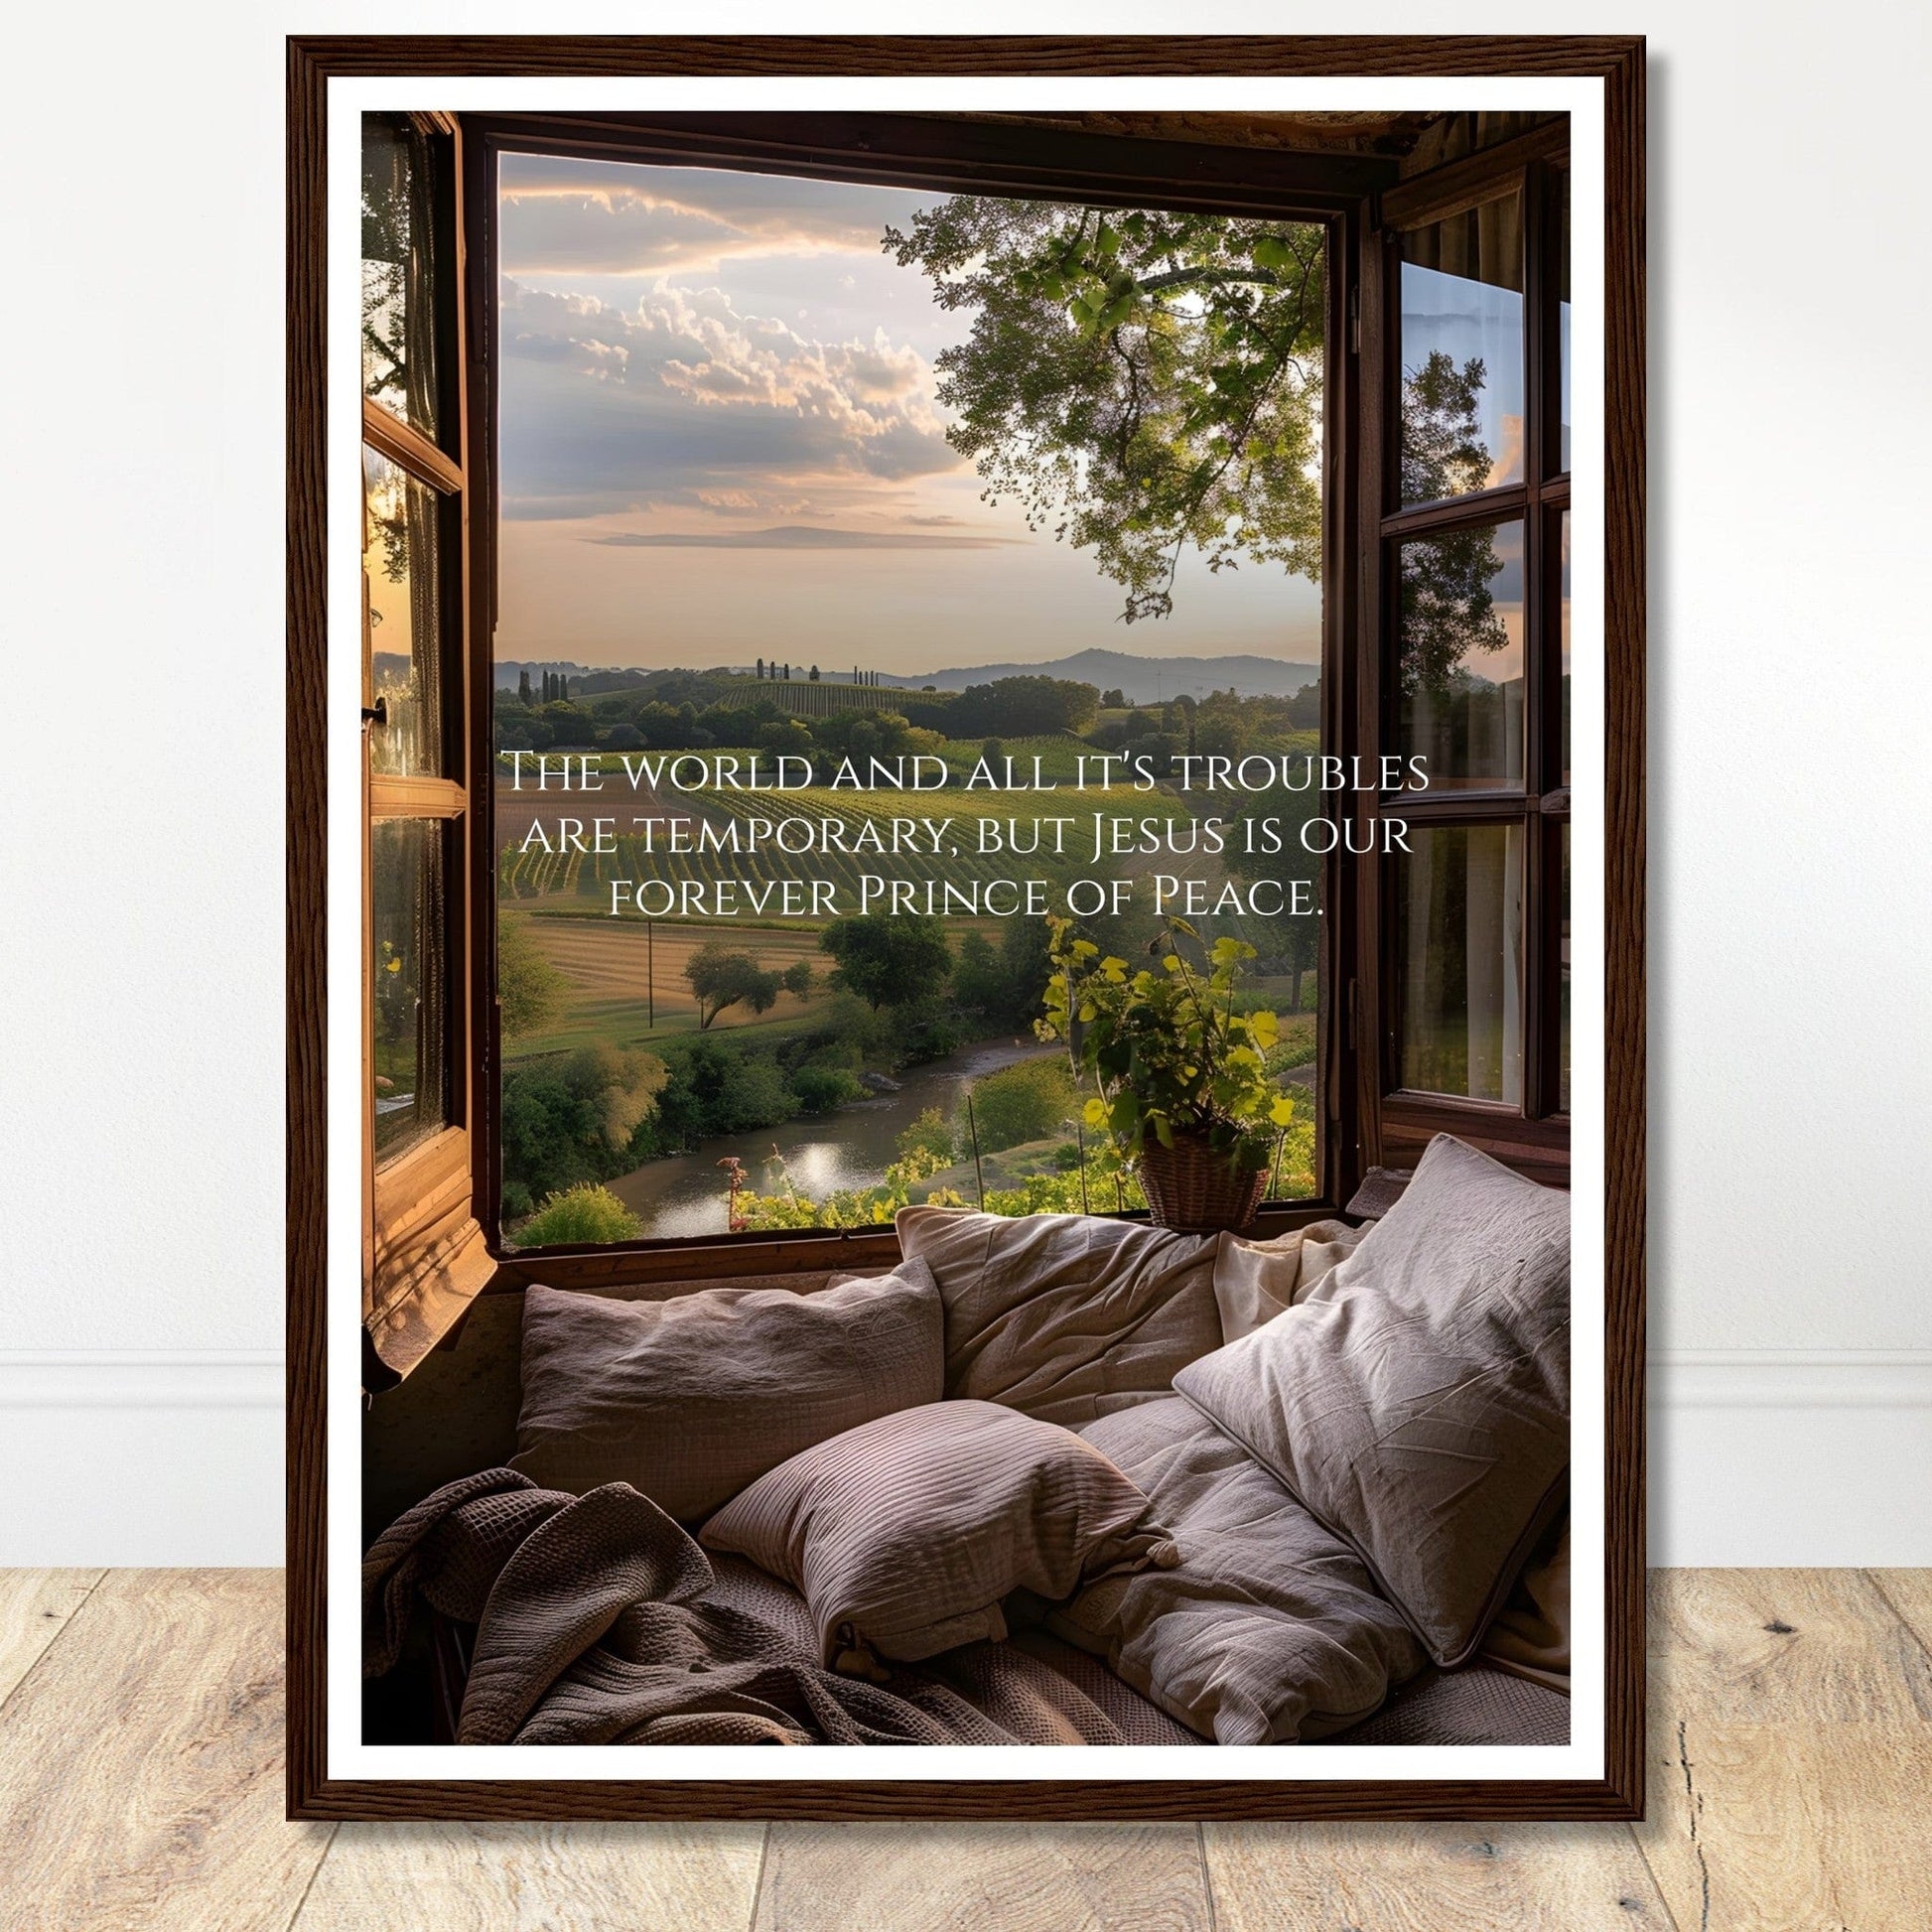 Coffee With My Father Print Material 45x60 cm / 18x24″ / Premium Matte Paper Wooden Framed Poster / Dark wood frame Jesus, Our Forever Prince of Peace